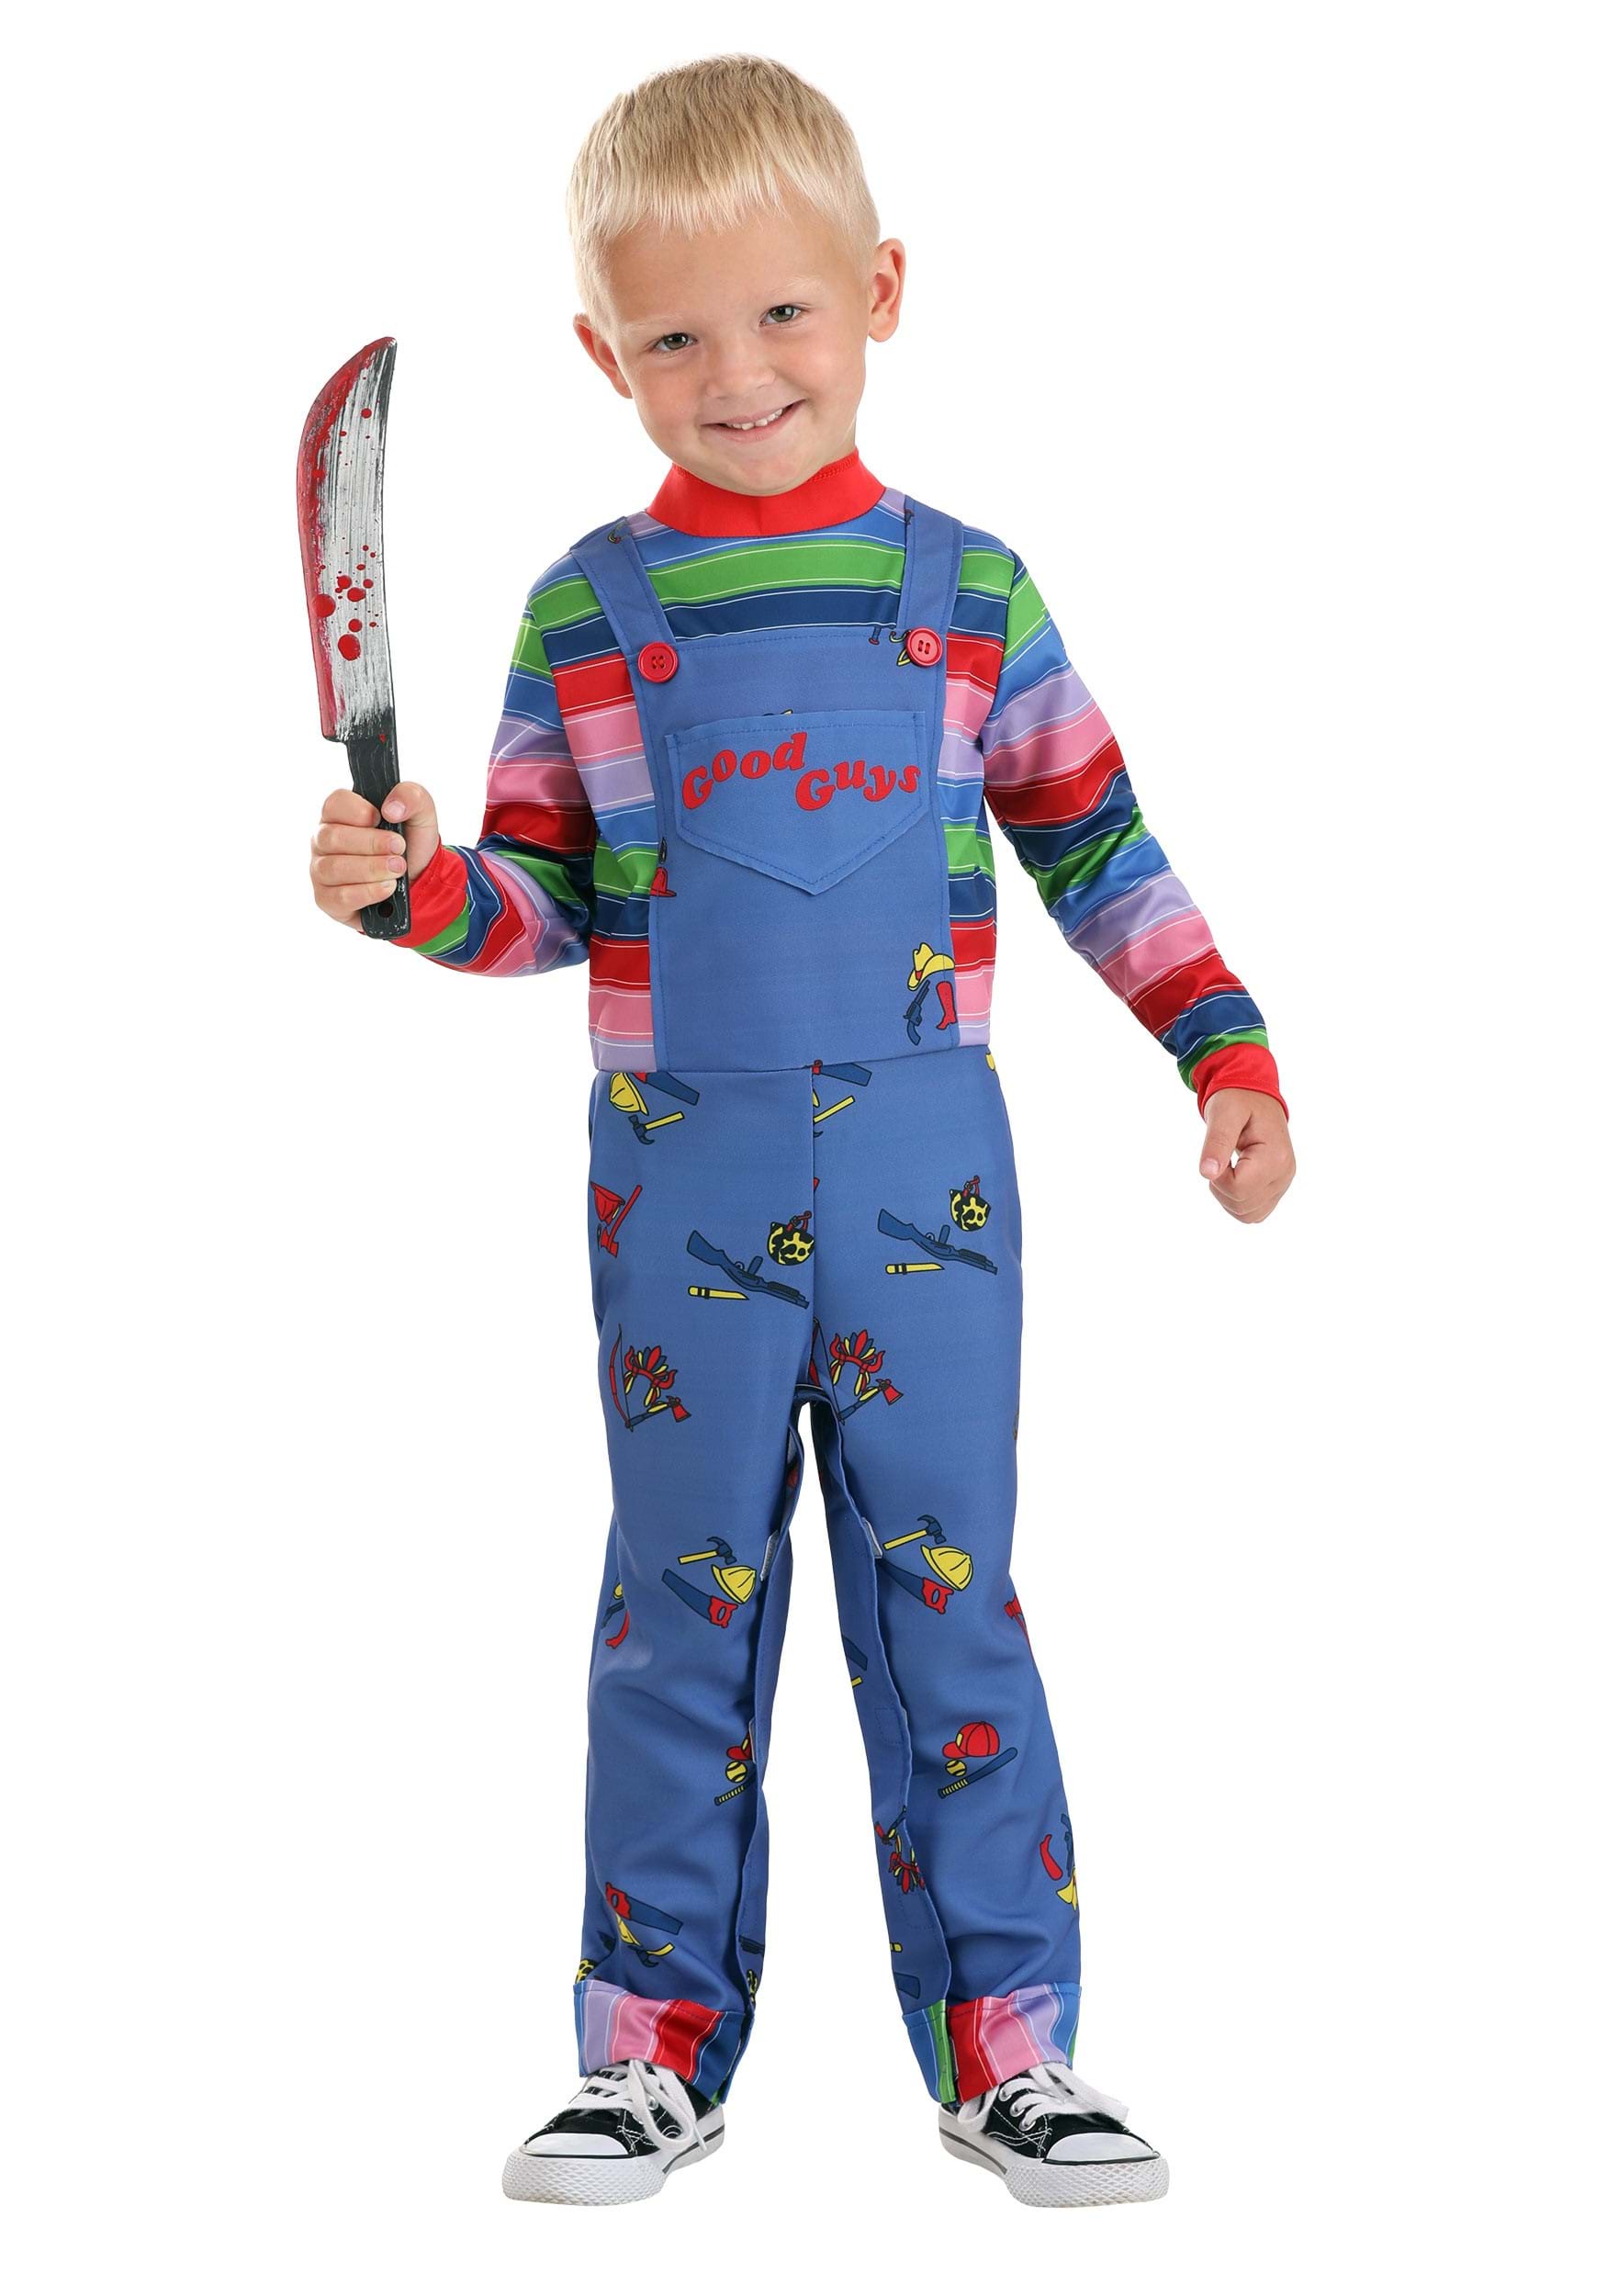 Child’s Play Boy’s Toddler Chucky Costume